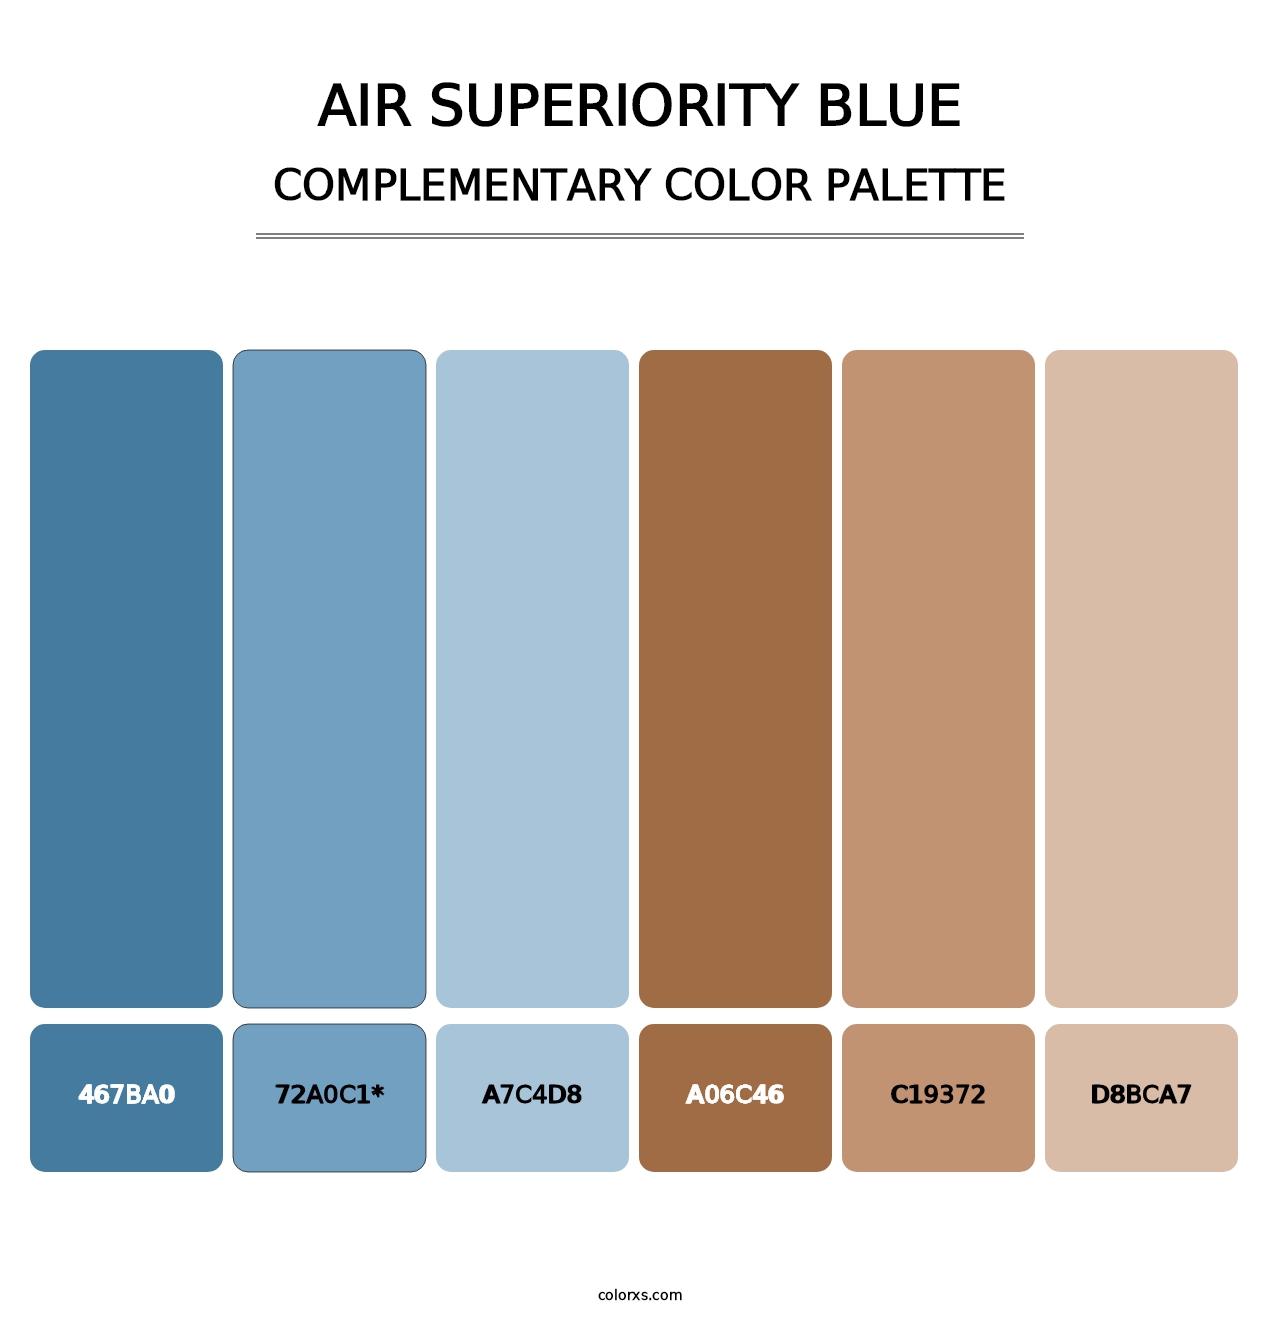 Air Superiority Blue - Complementary Color Palette